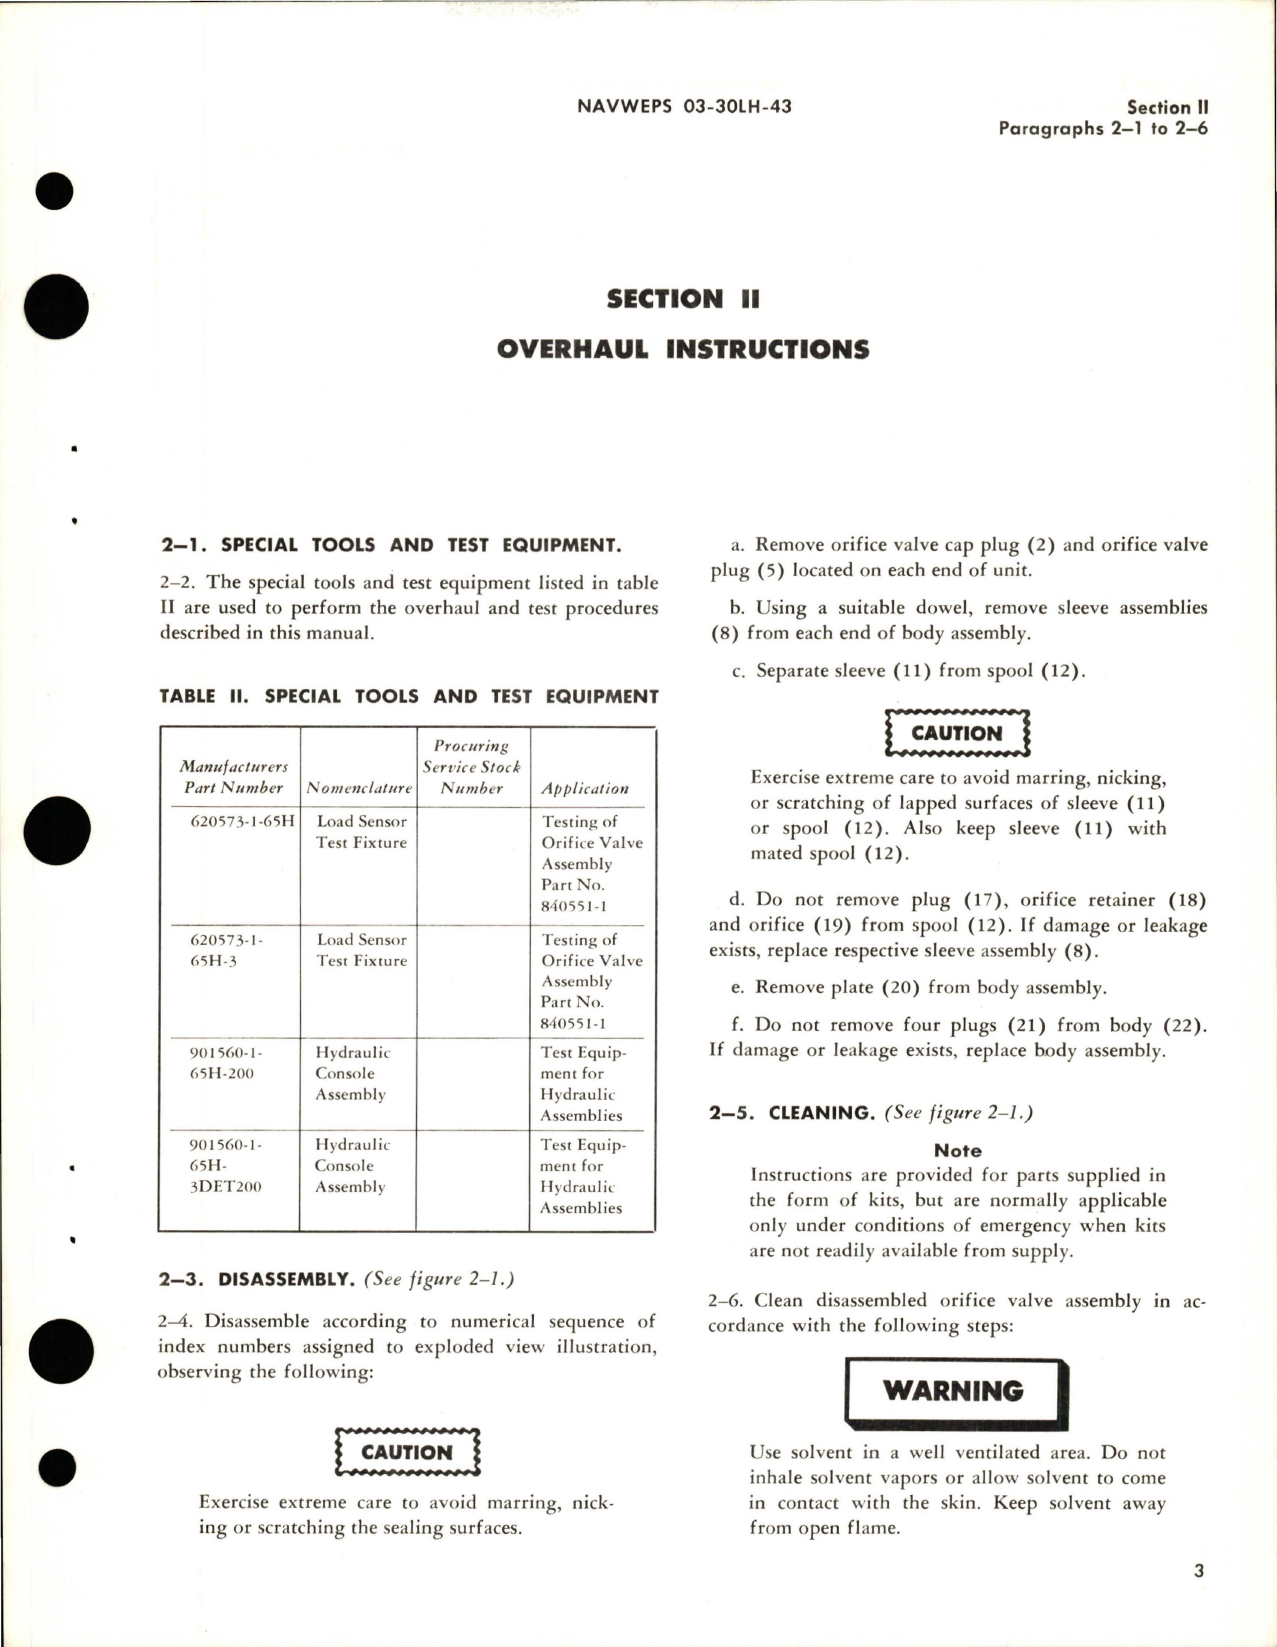 Sample page 5 from AirCorps Library document: Overhaul Instructions for Bypass Dual System Shutoff Orifice Valve Assembly - Part 840551-1 